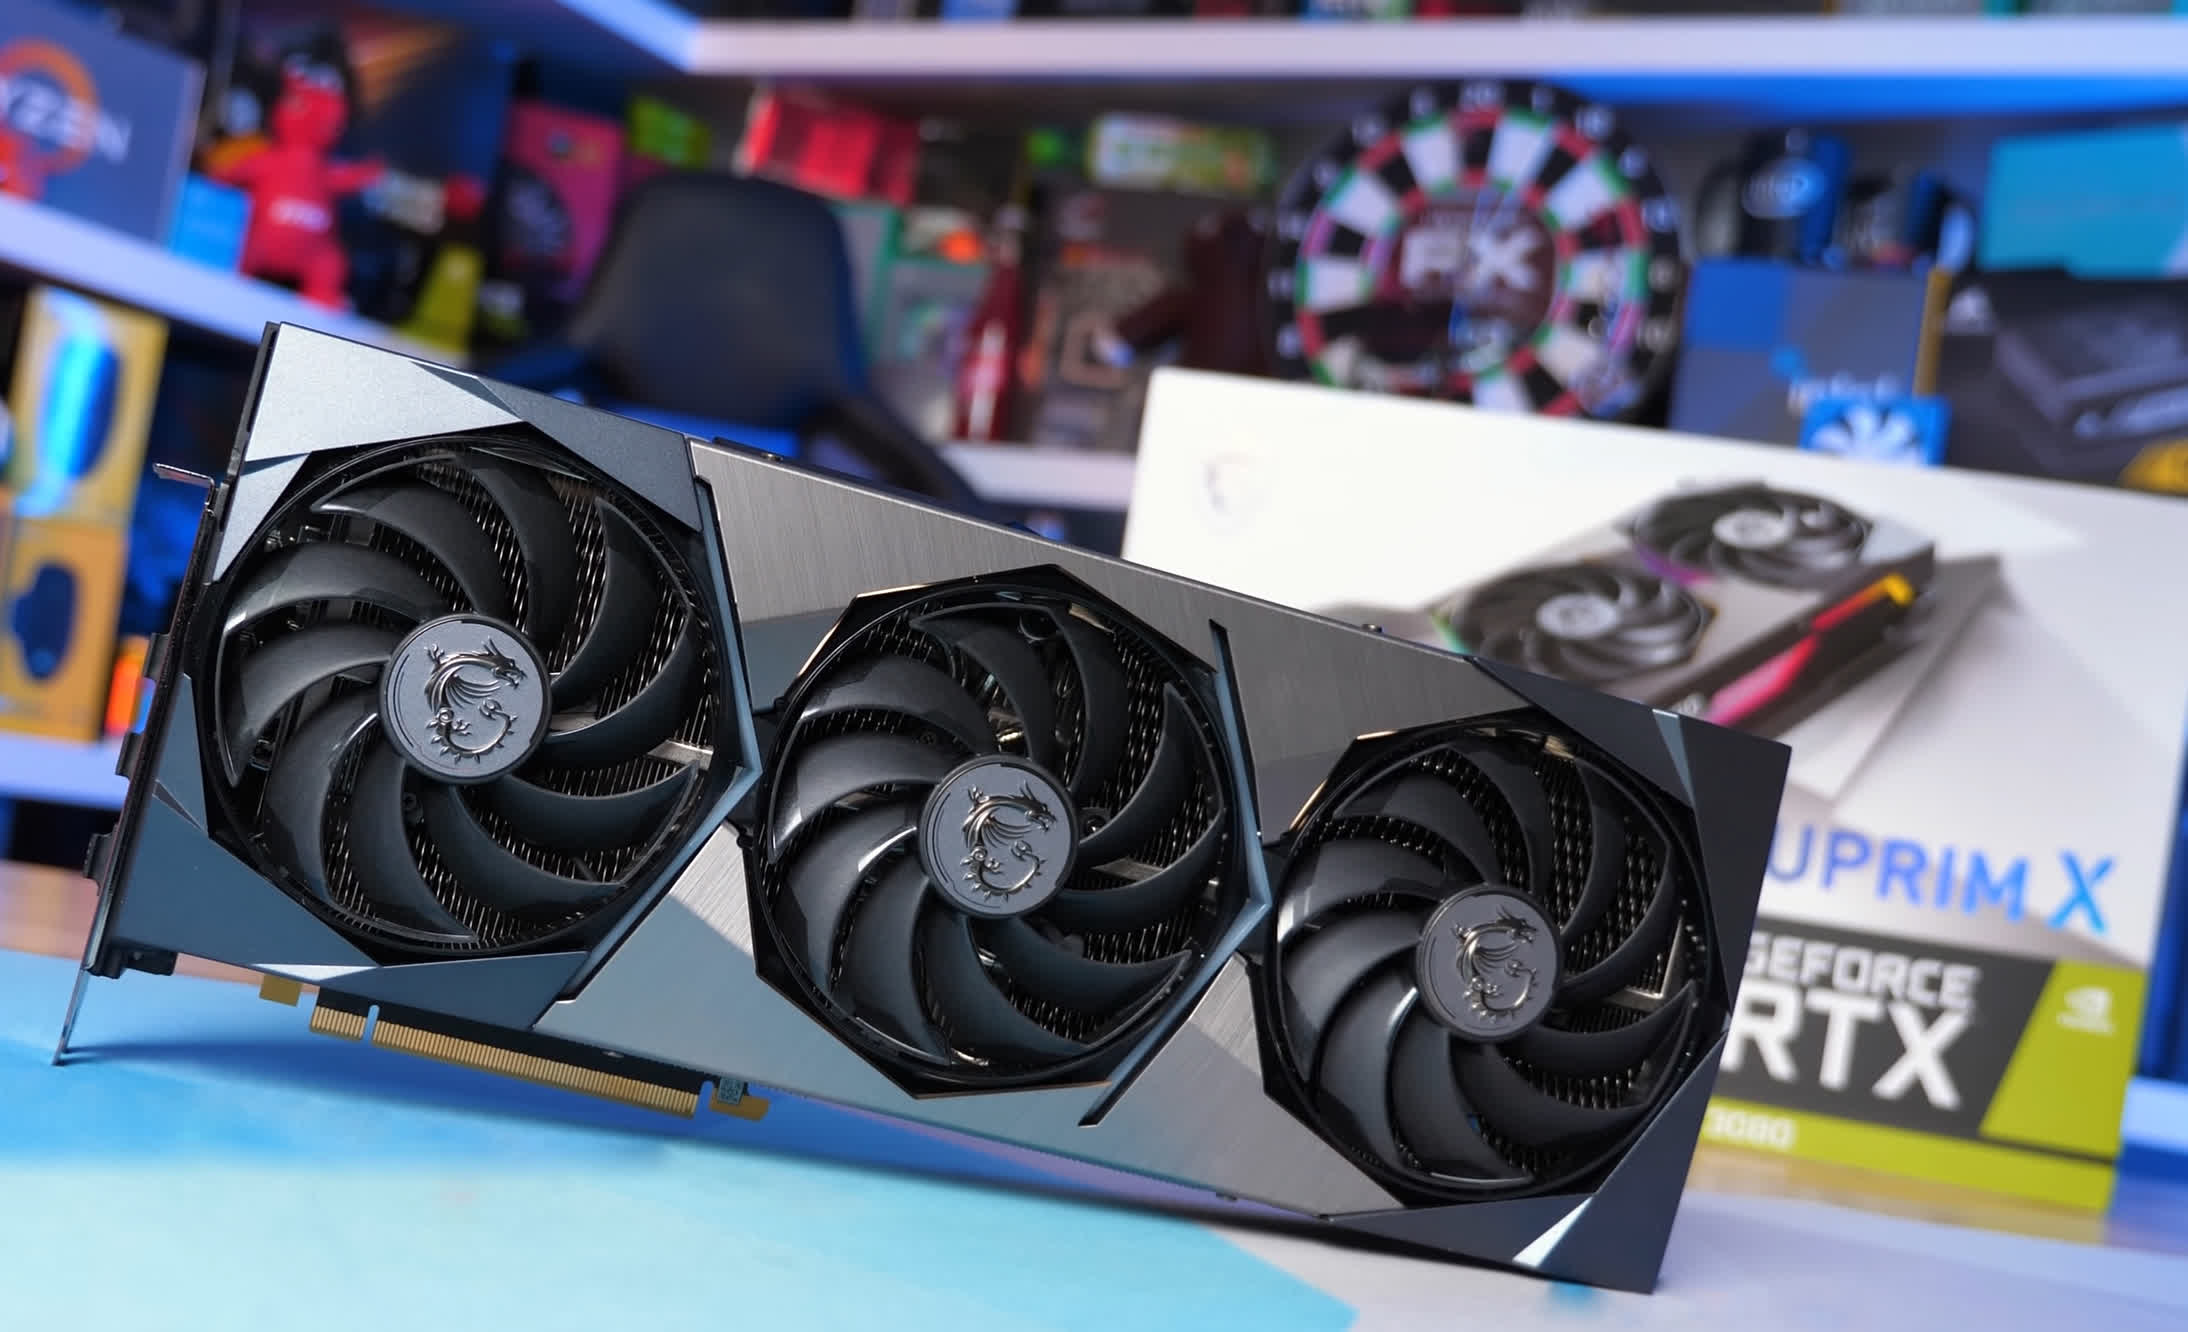 Graphics cards hit their lowest prices since the start of 2021